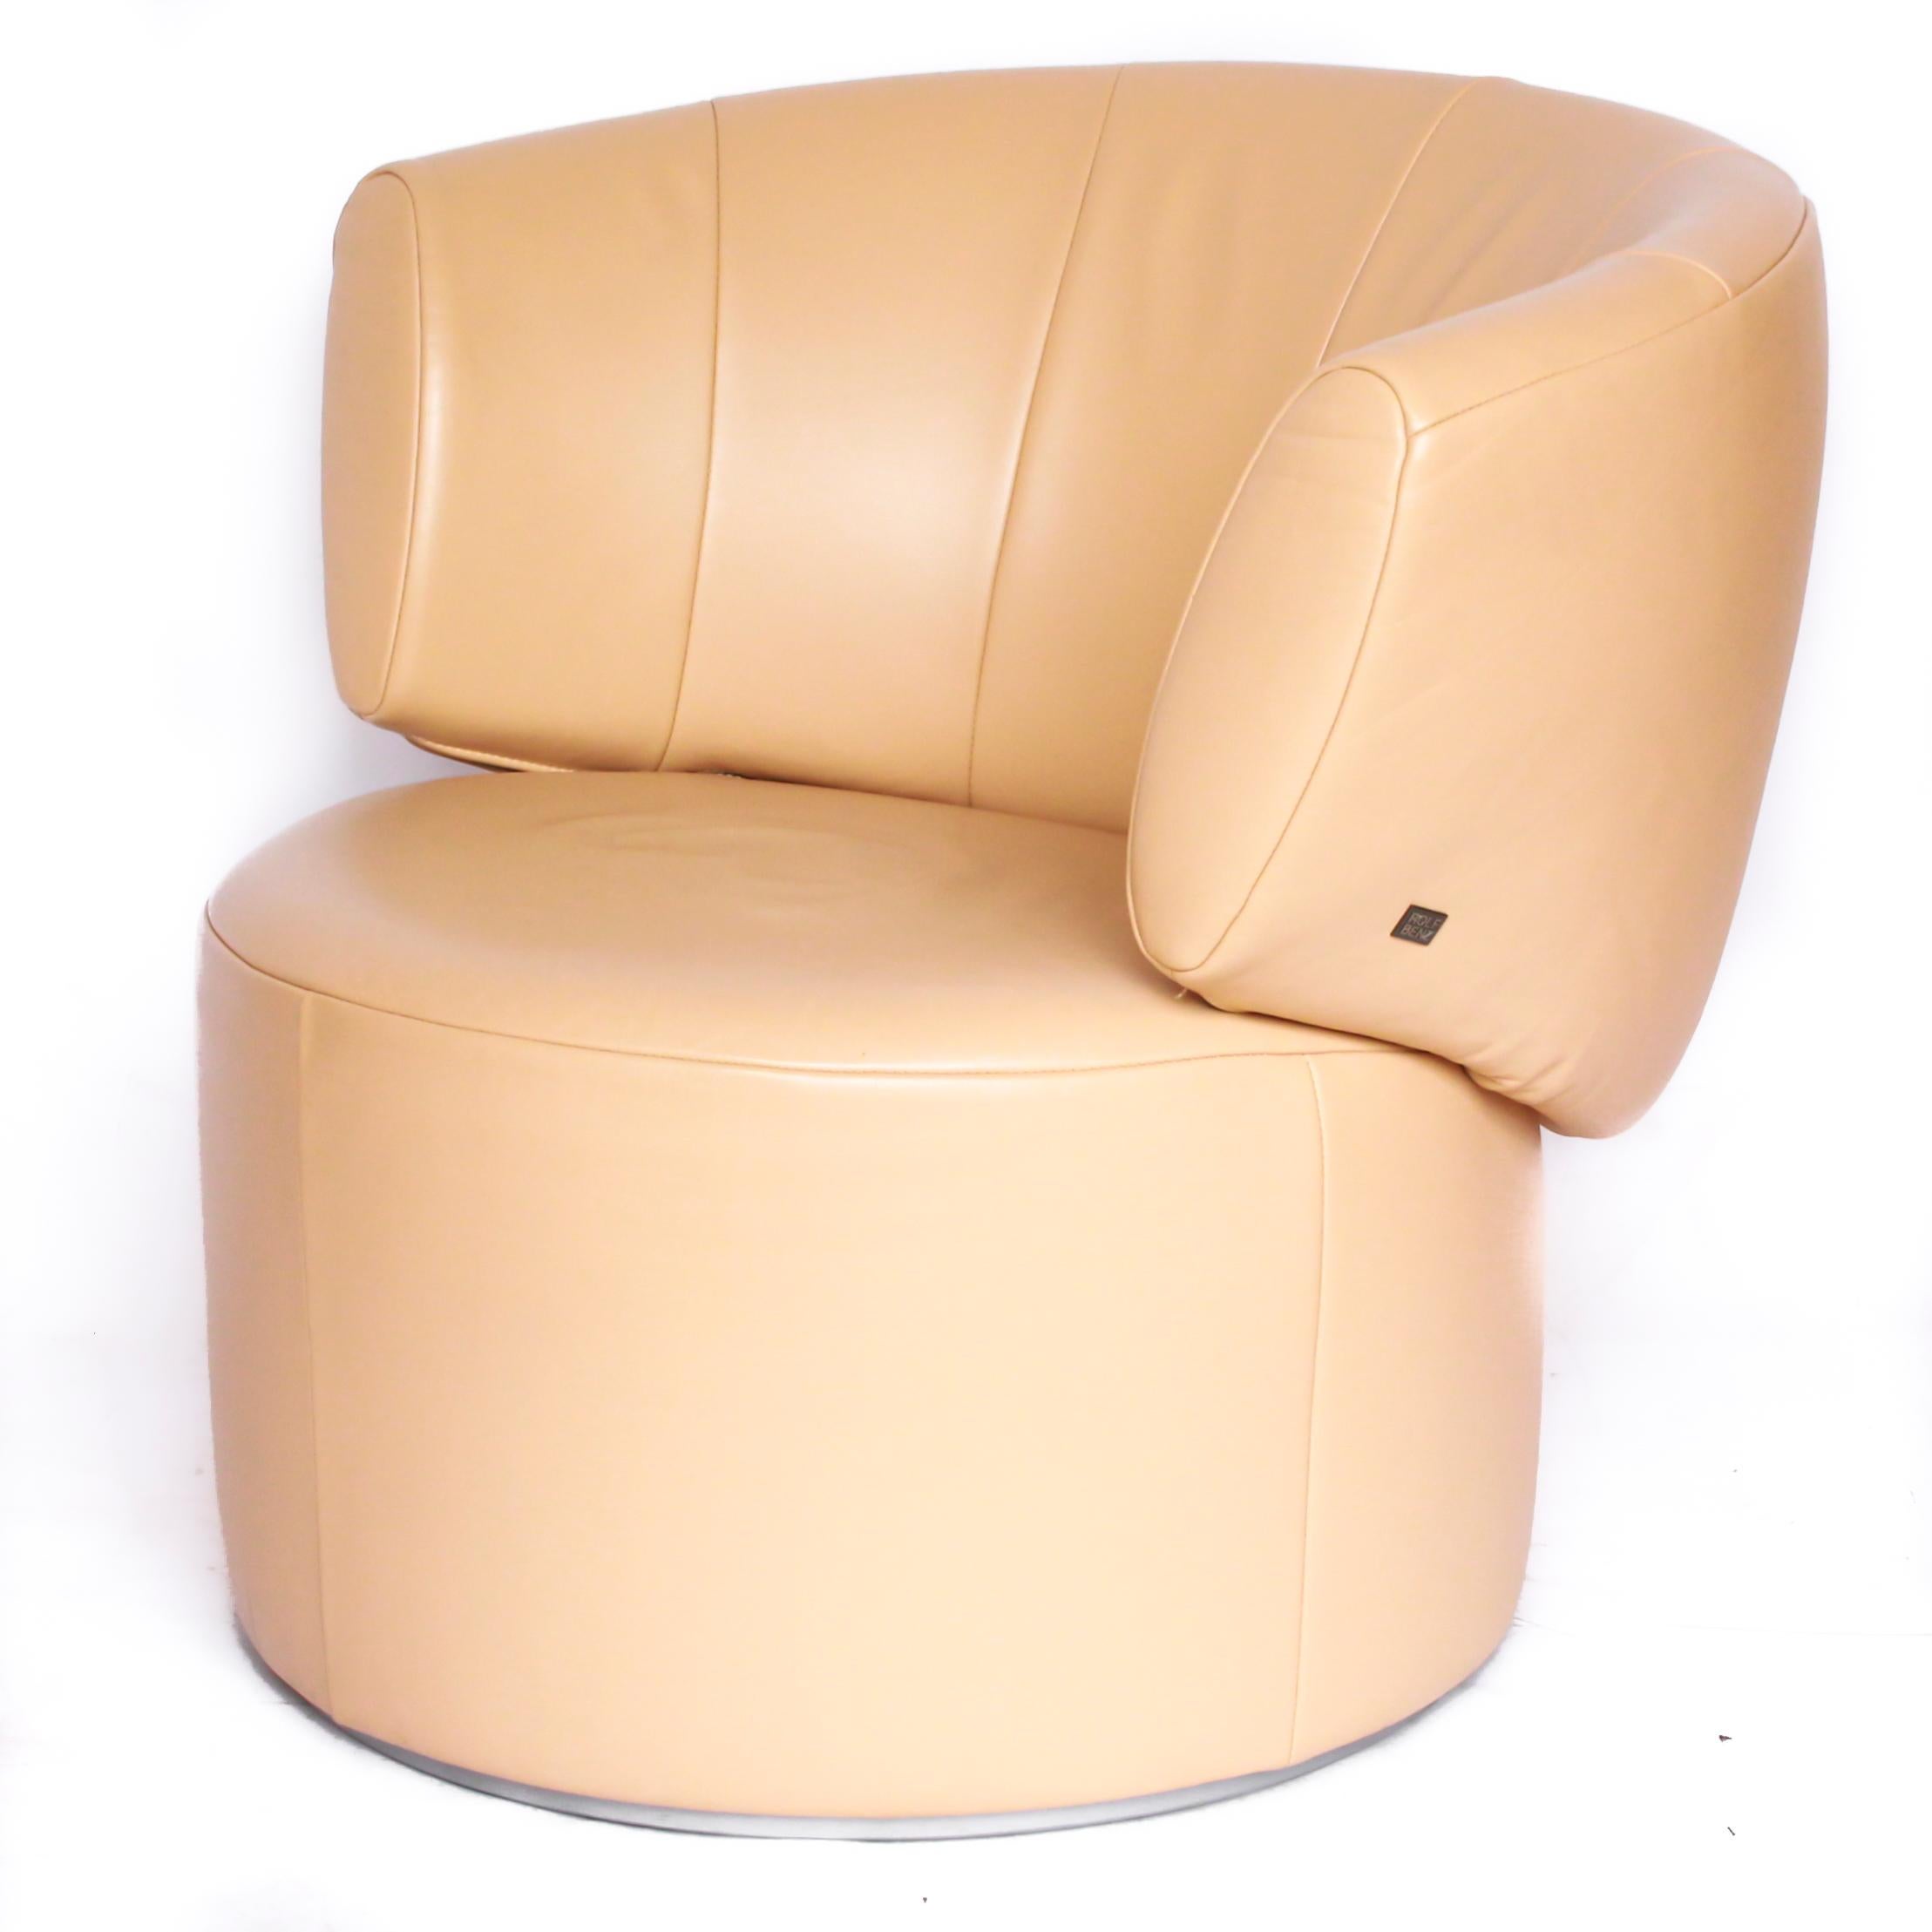 Pair of Rolf Benz 684 Armchairs Cream Leather Wooden Base Swivel Movement 2